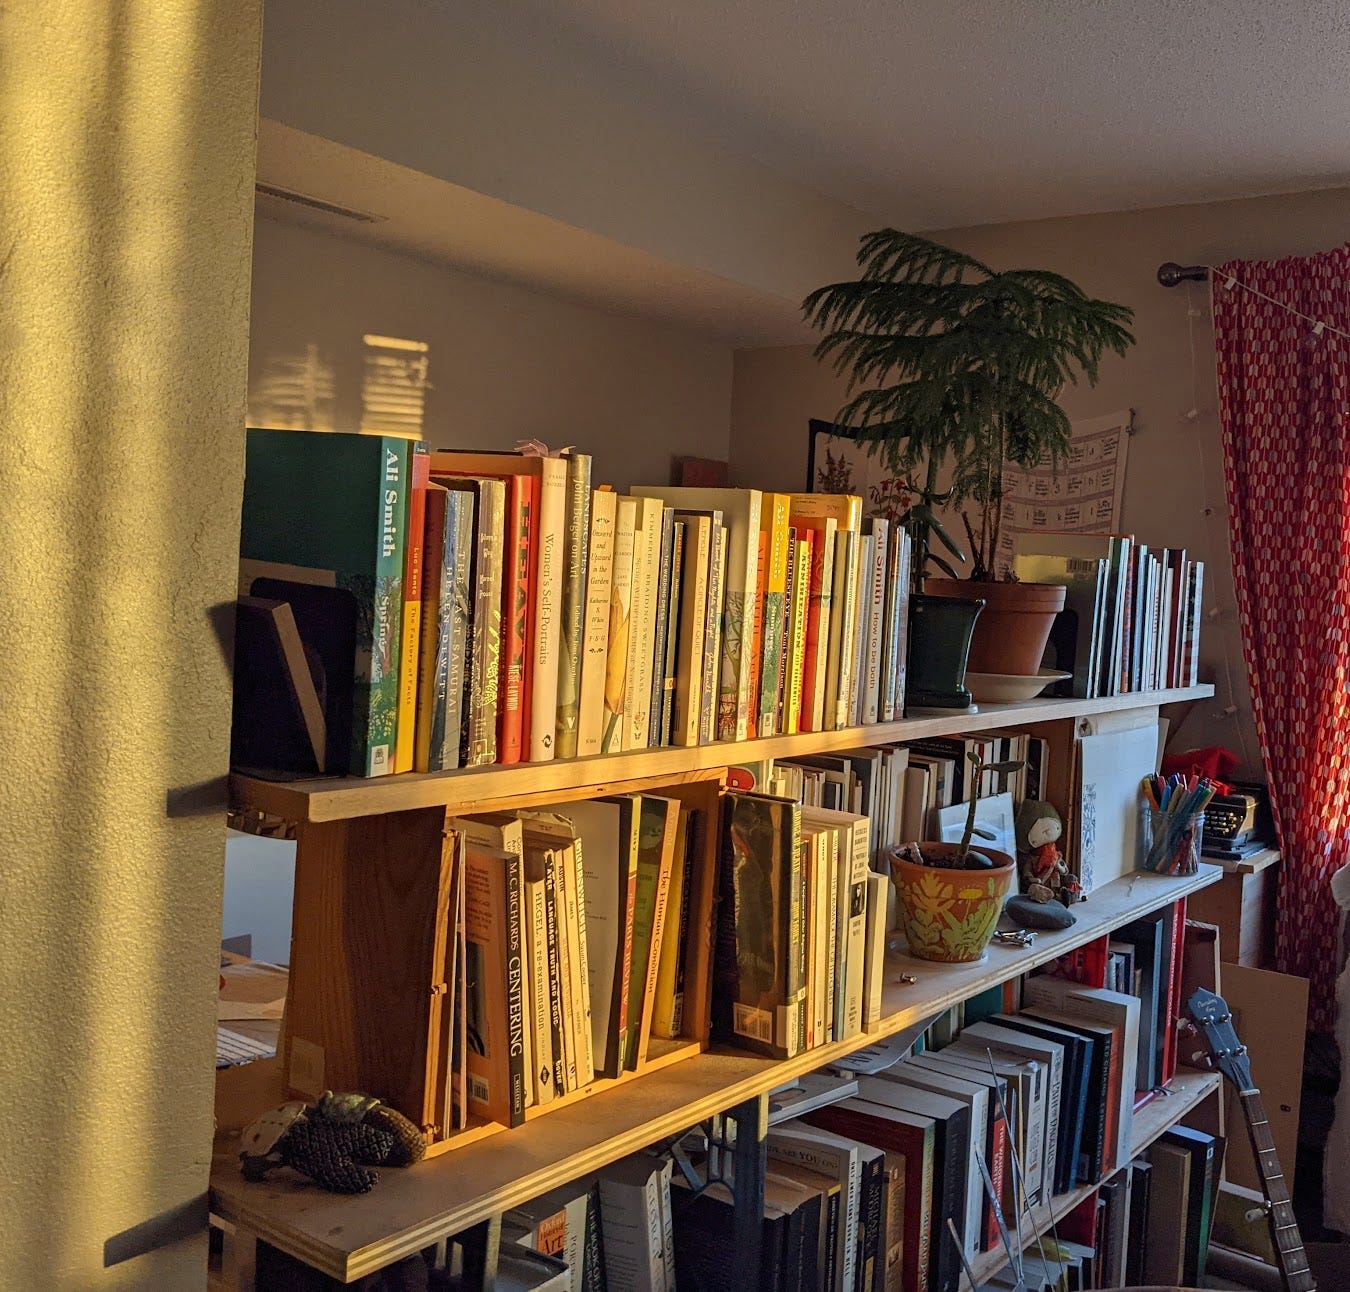 a bookshelf made of boards and boxes, holding books, plants, small toys